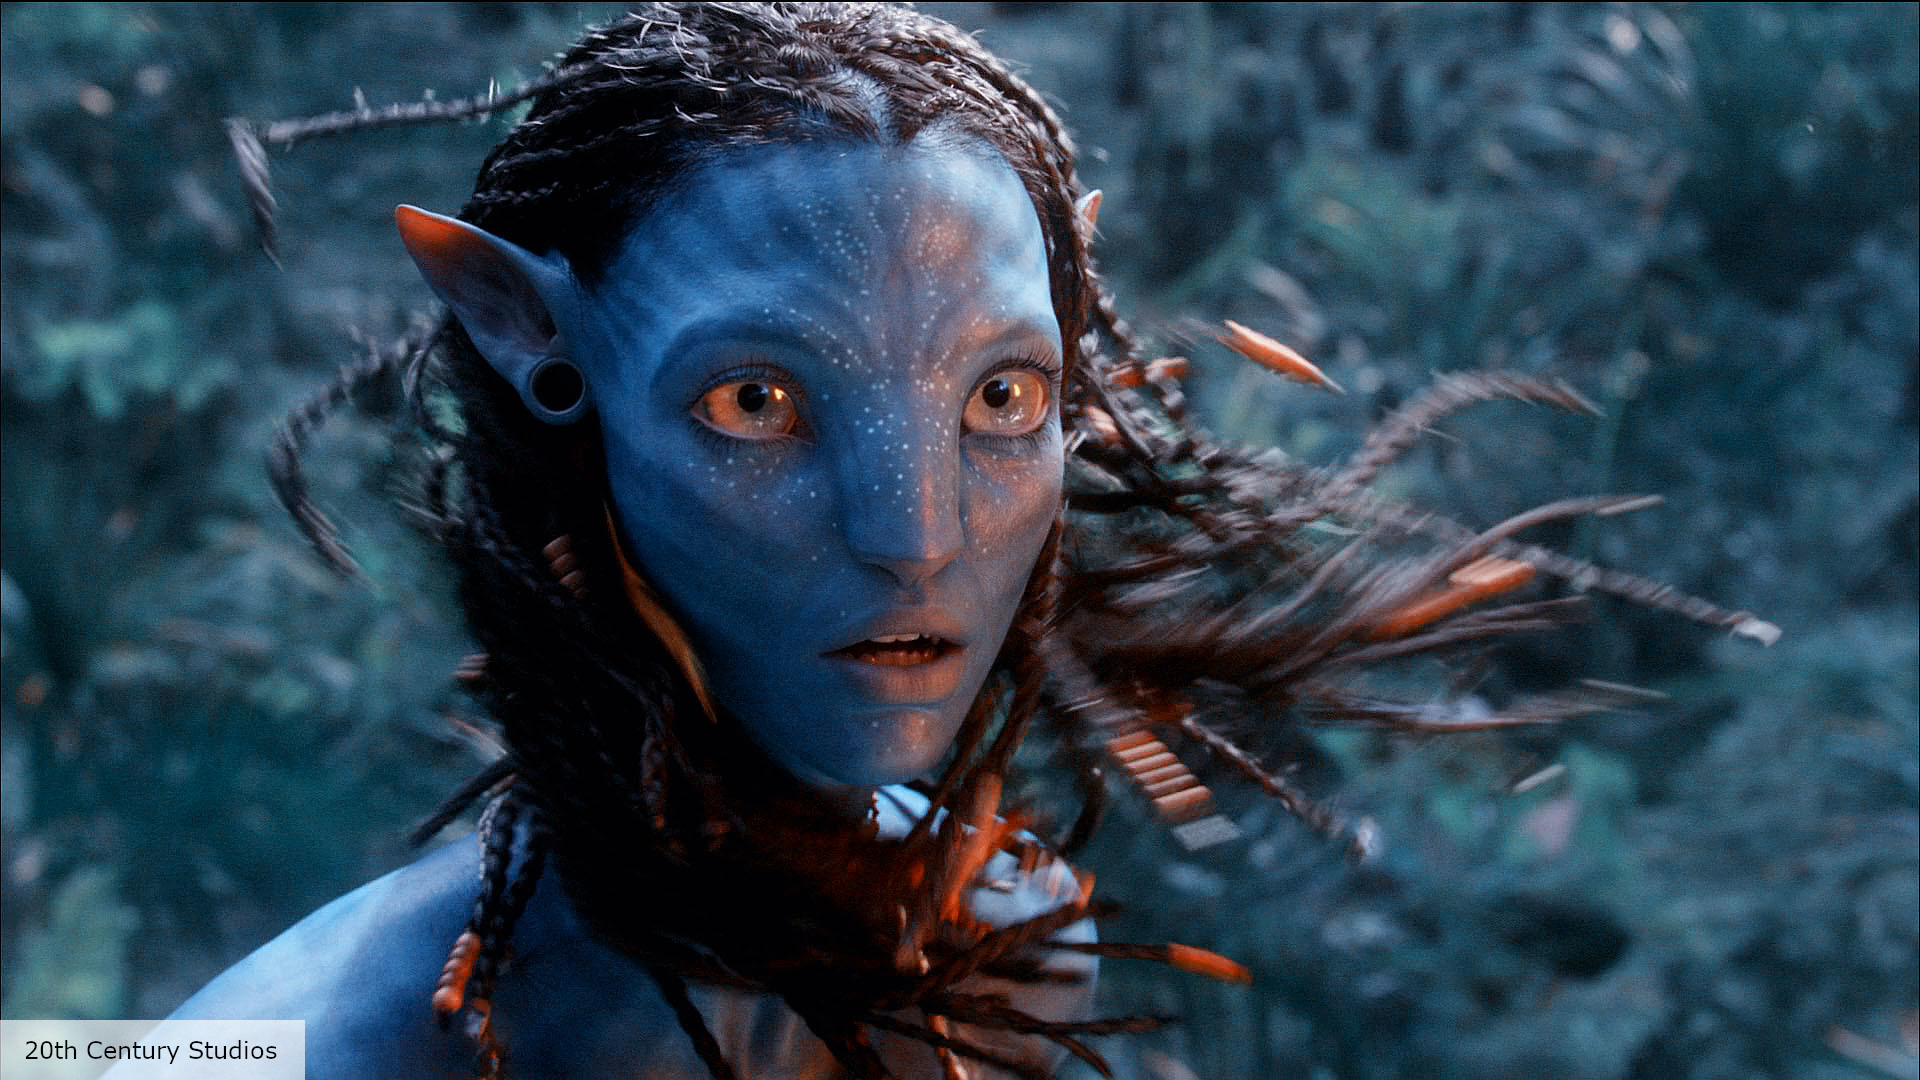 Avatar: is Na’vi a real language?